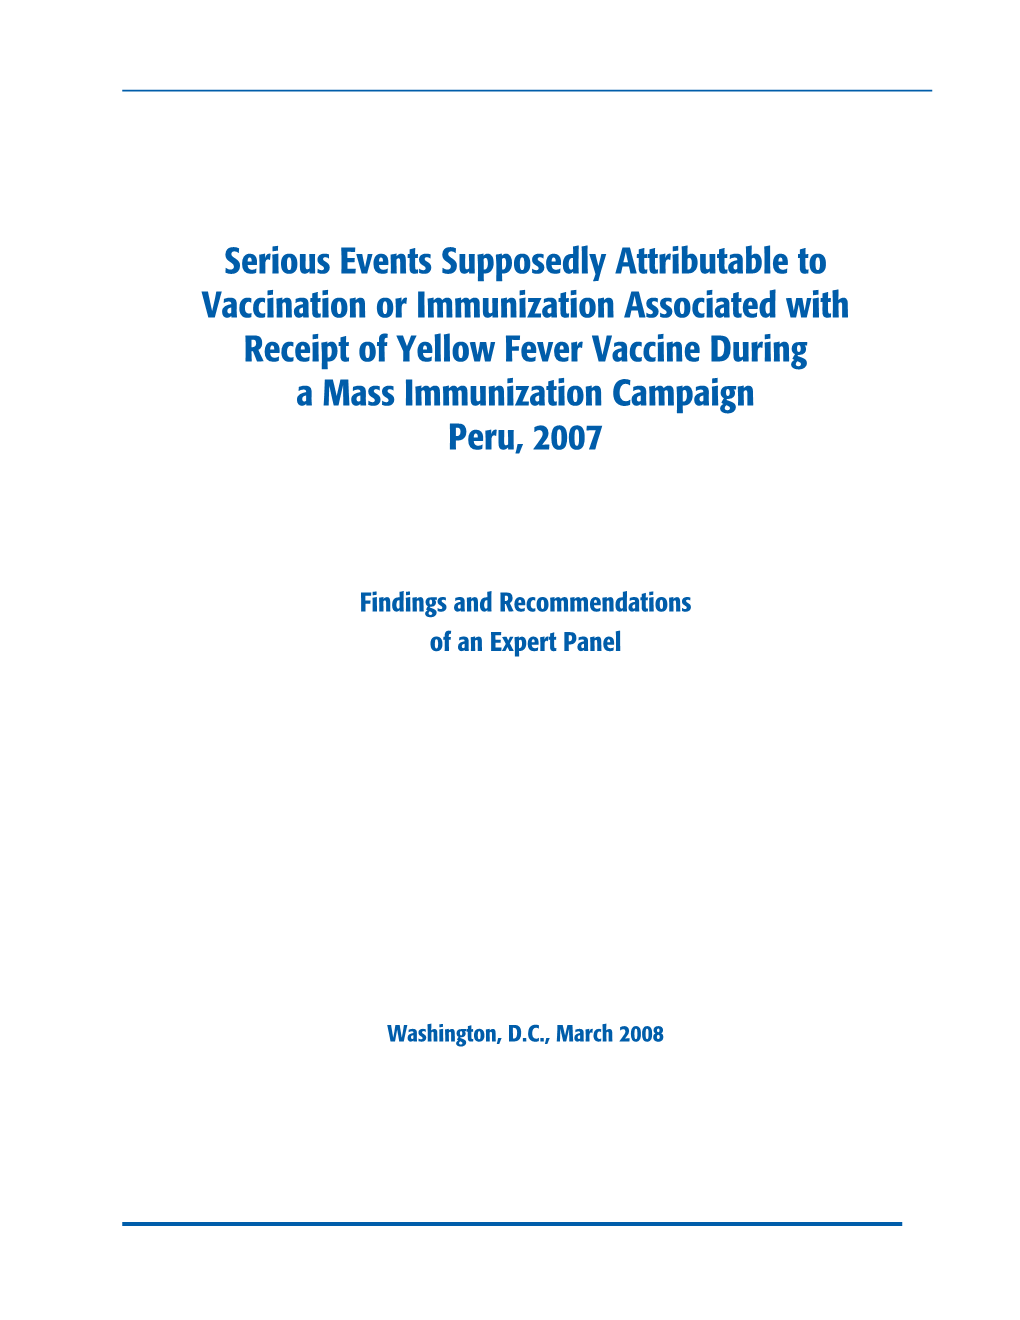 Serious Events Supposedly Attributable to Vaccination Or Immunization Associated with Receipt of Yellow Fever Vaccine During a Mass Immunization Campaign Peru, 2007